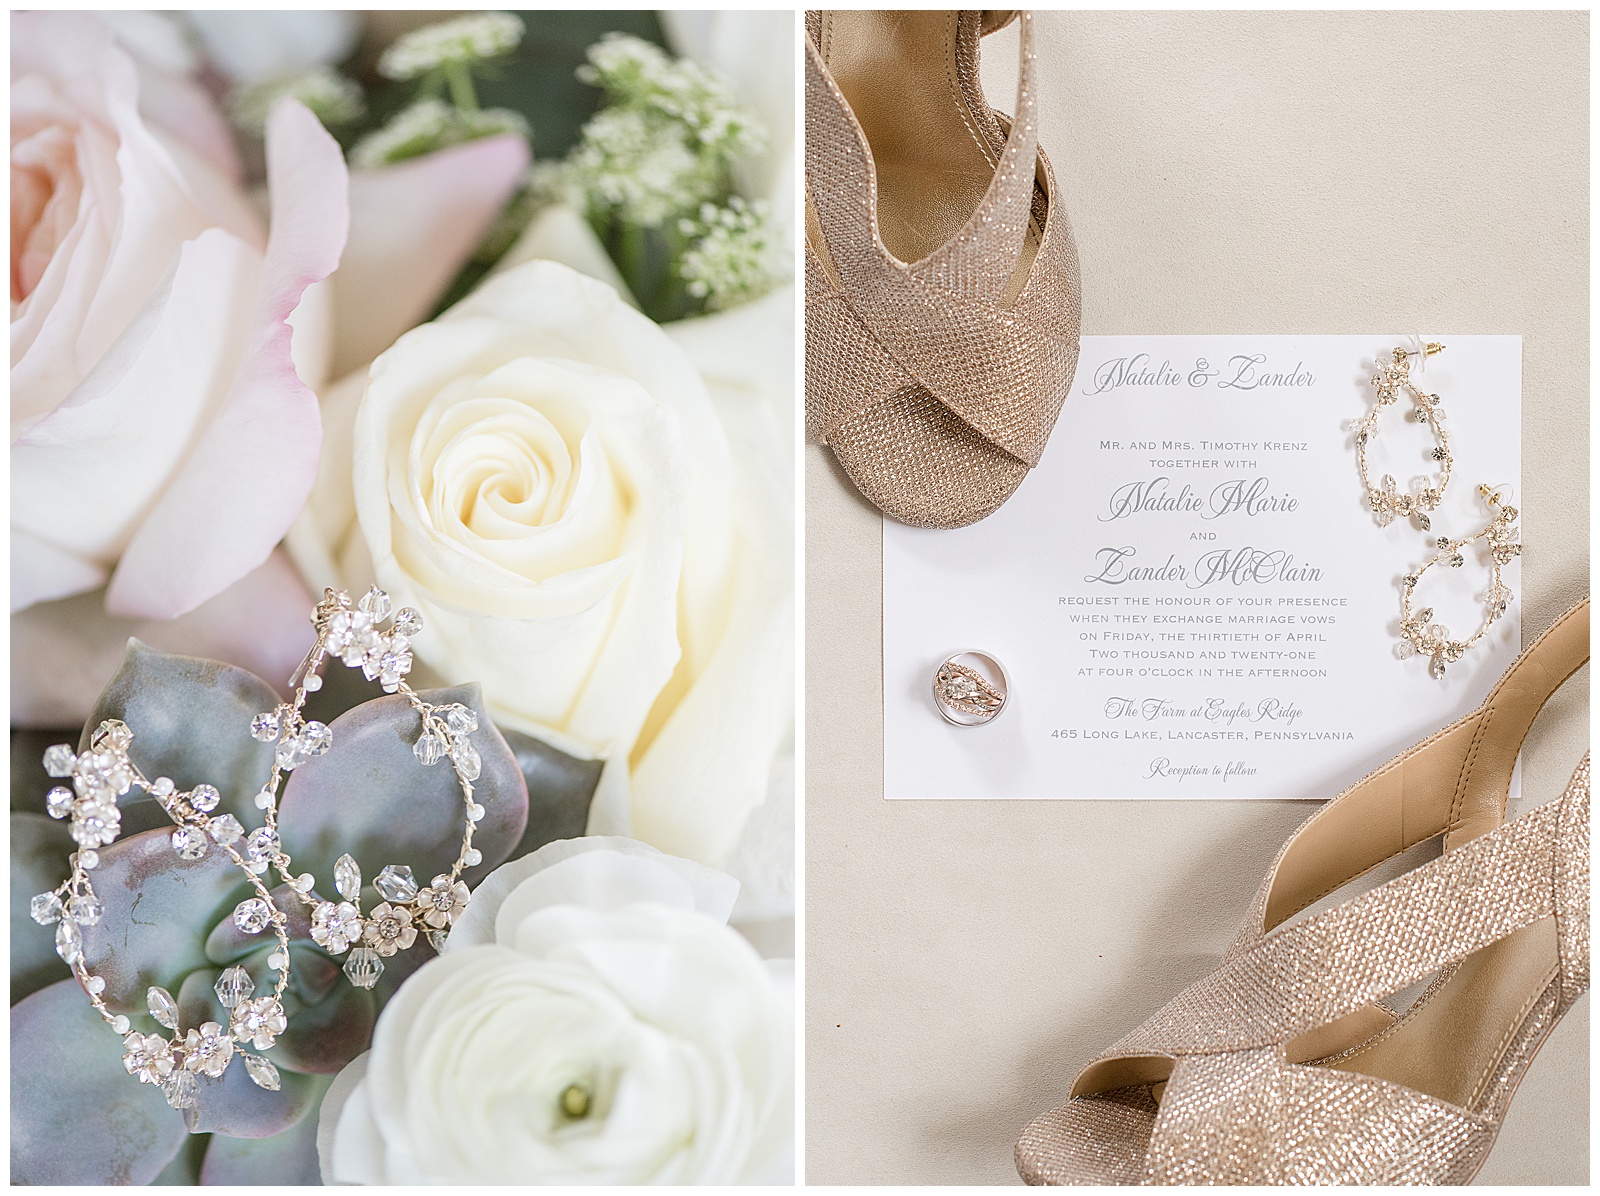 wedding jewelry surrounded by white roses and flowers and wedding invitation and bride's glittery shoes